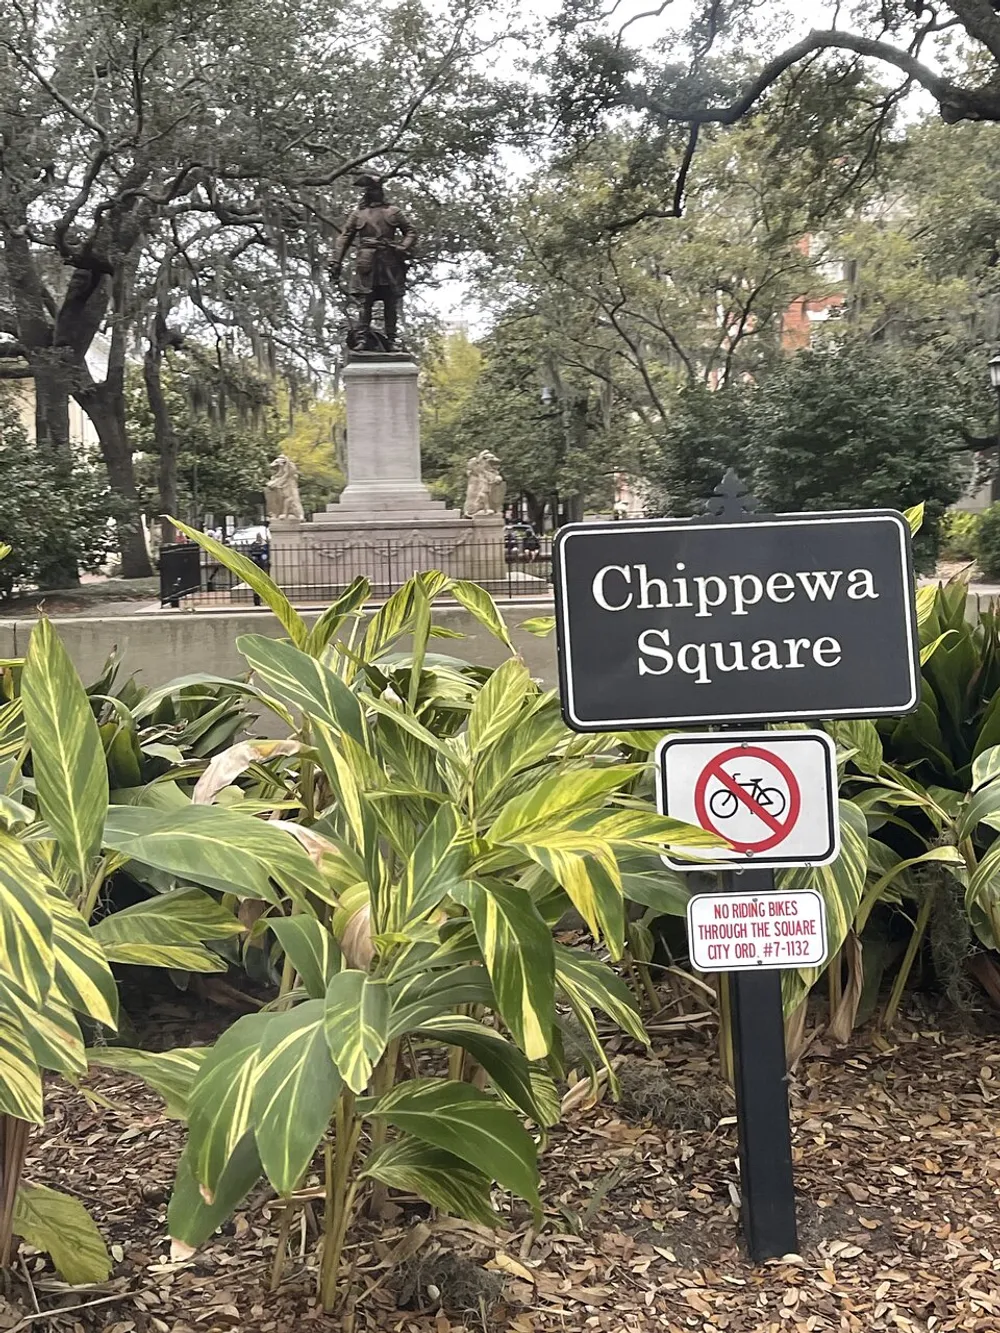 The image shows a sign for Chippewa Square with lush greenery in the foreground and a statue of a historical figure on a pedestal in the background surrounded by the ambiance of a peaceful park